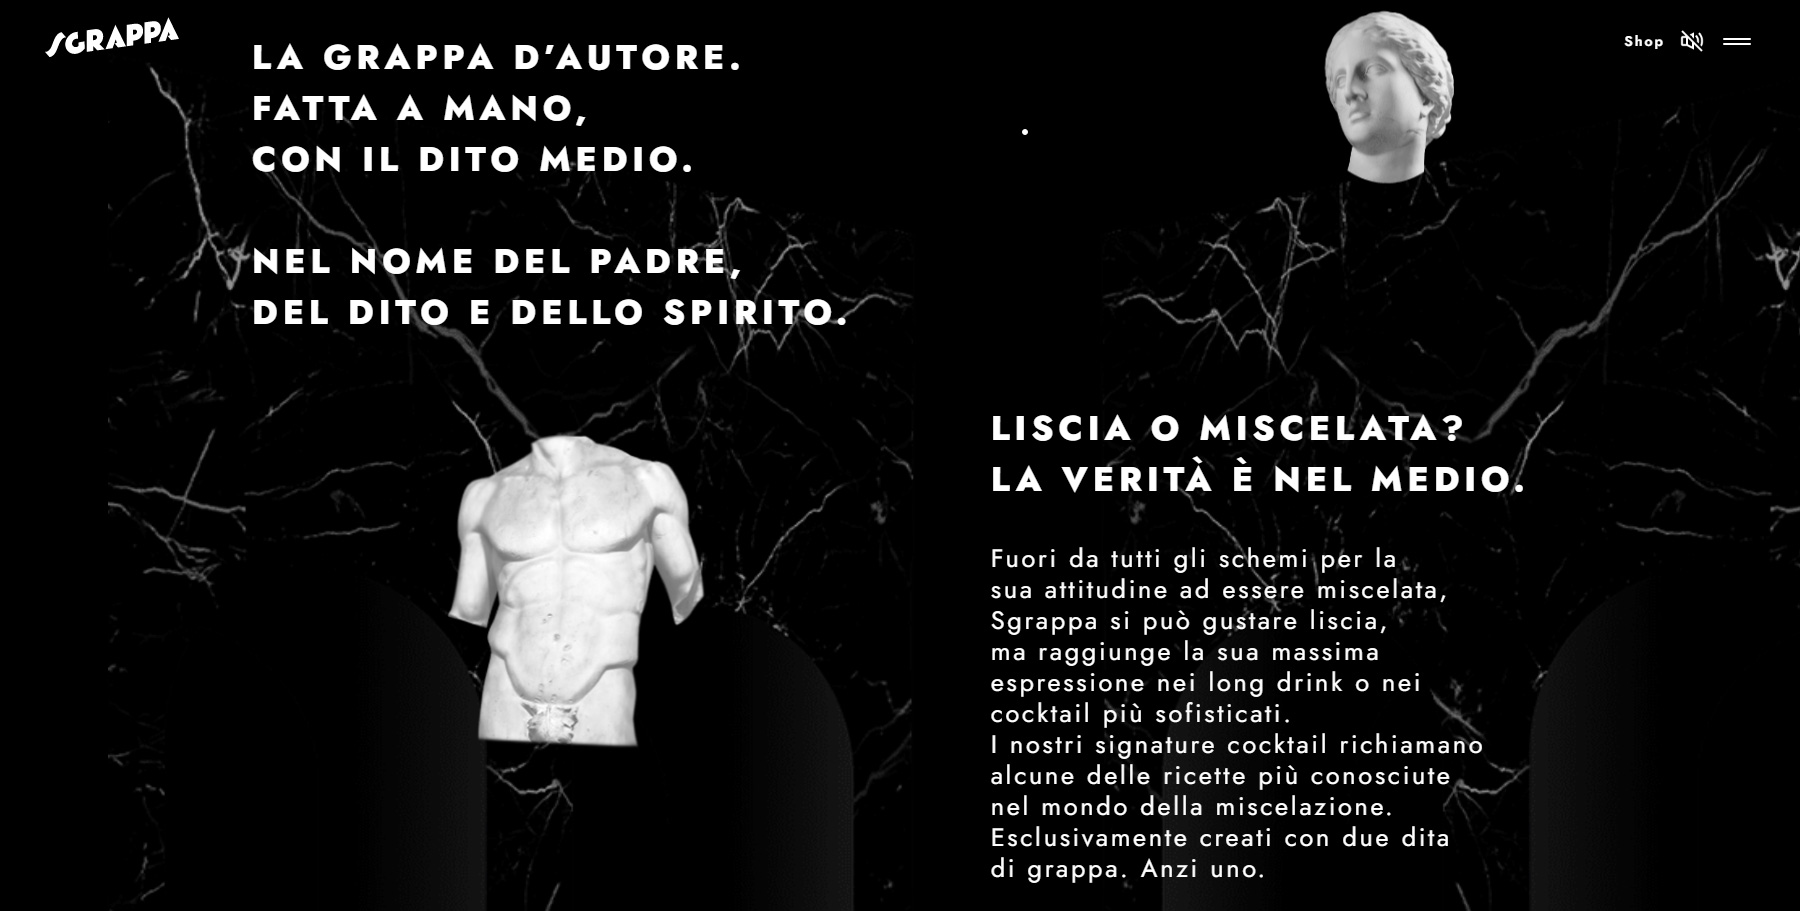 SGRAPPA - Website of the Day